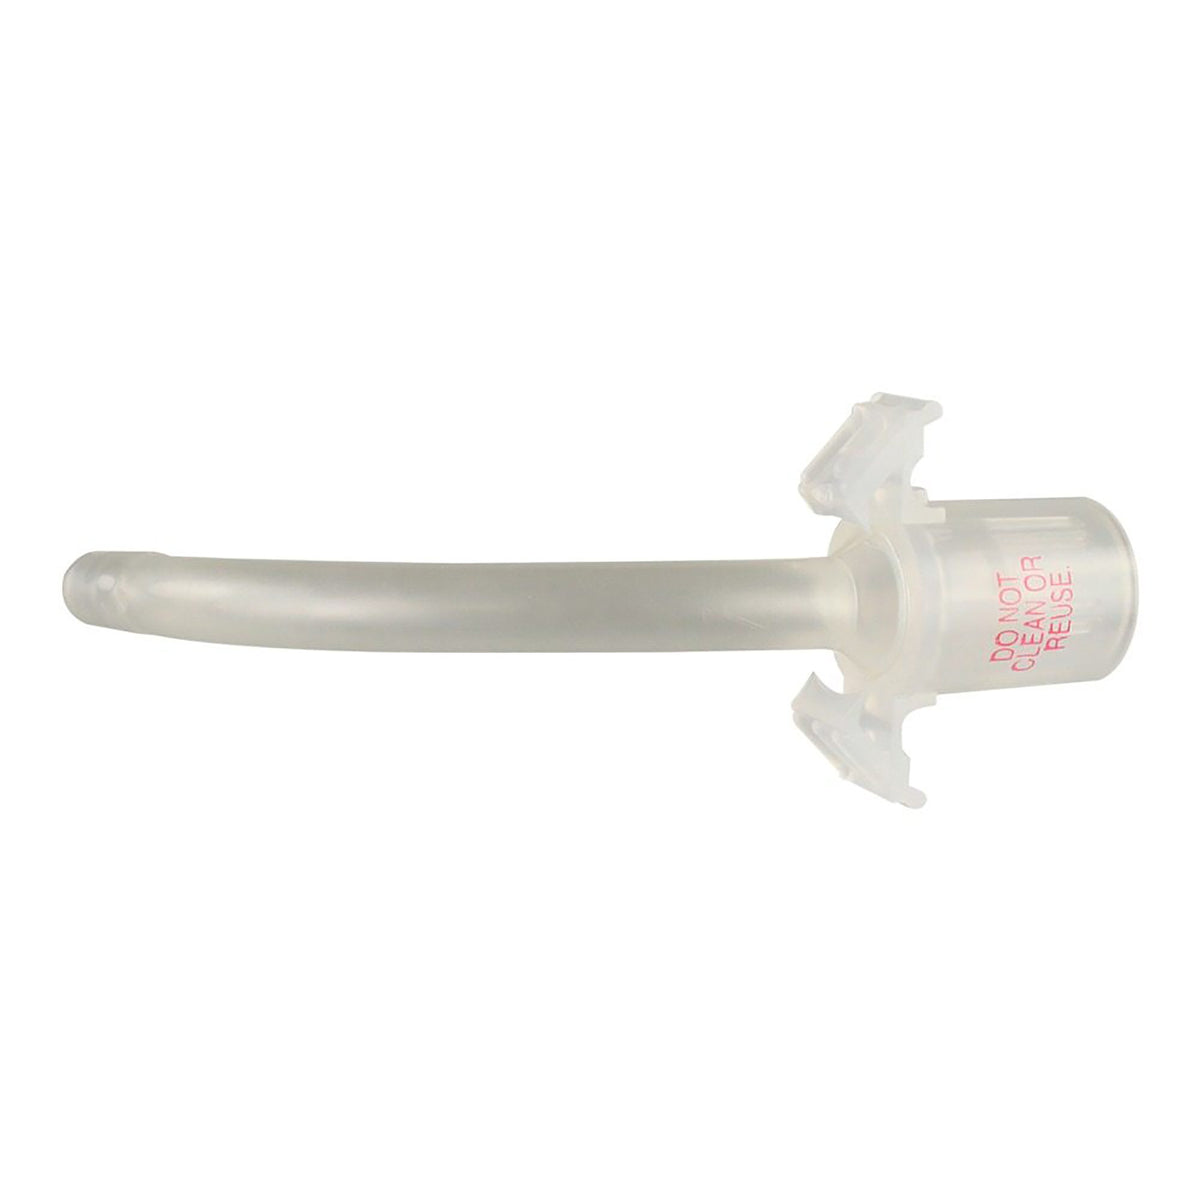 Shiley™ Disposable Inner Tracheostomy Cannula Size 6- 6DIC